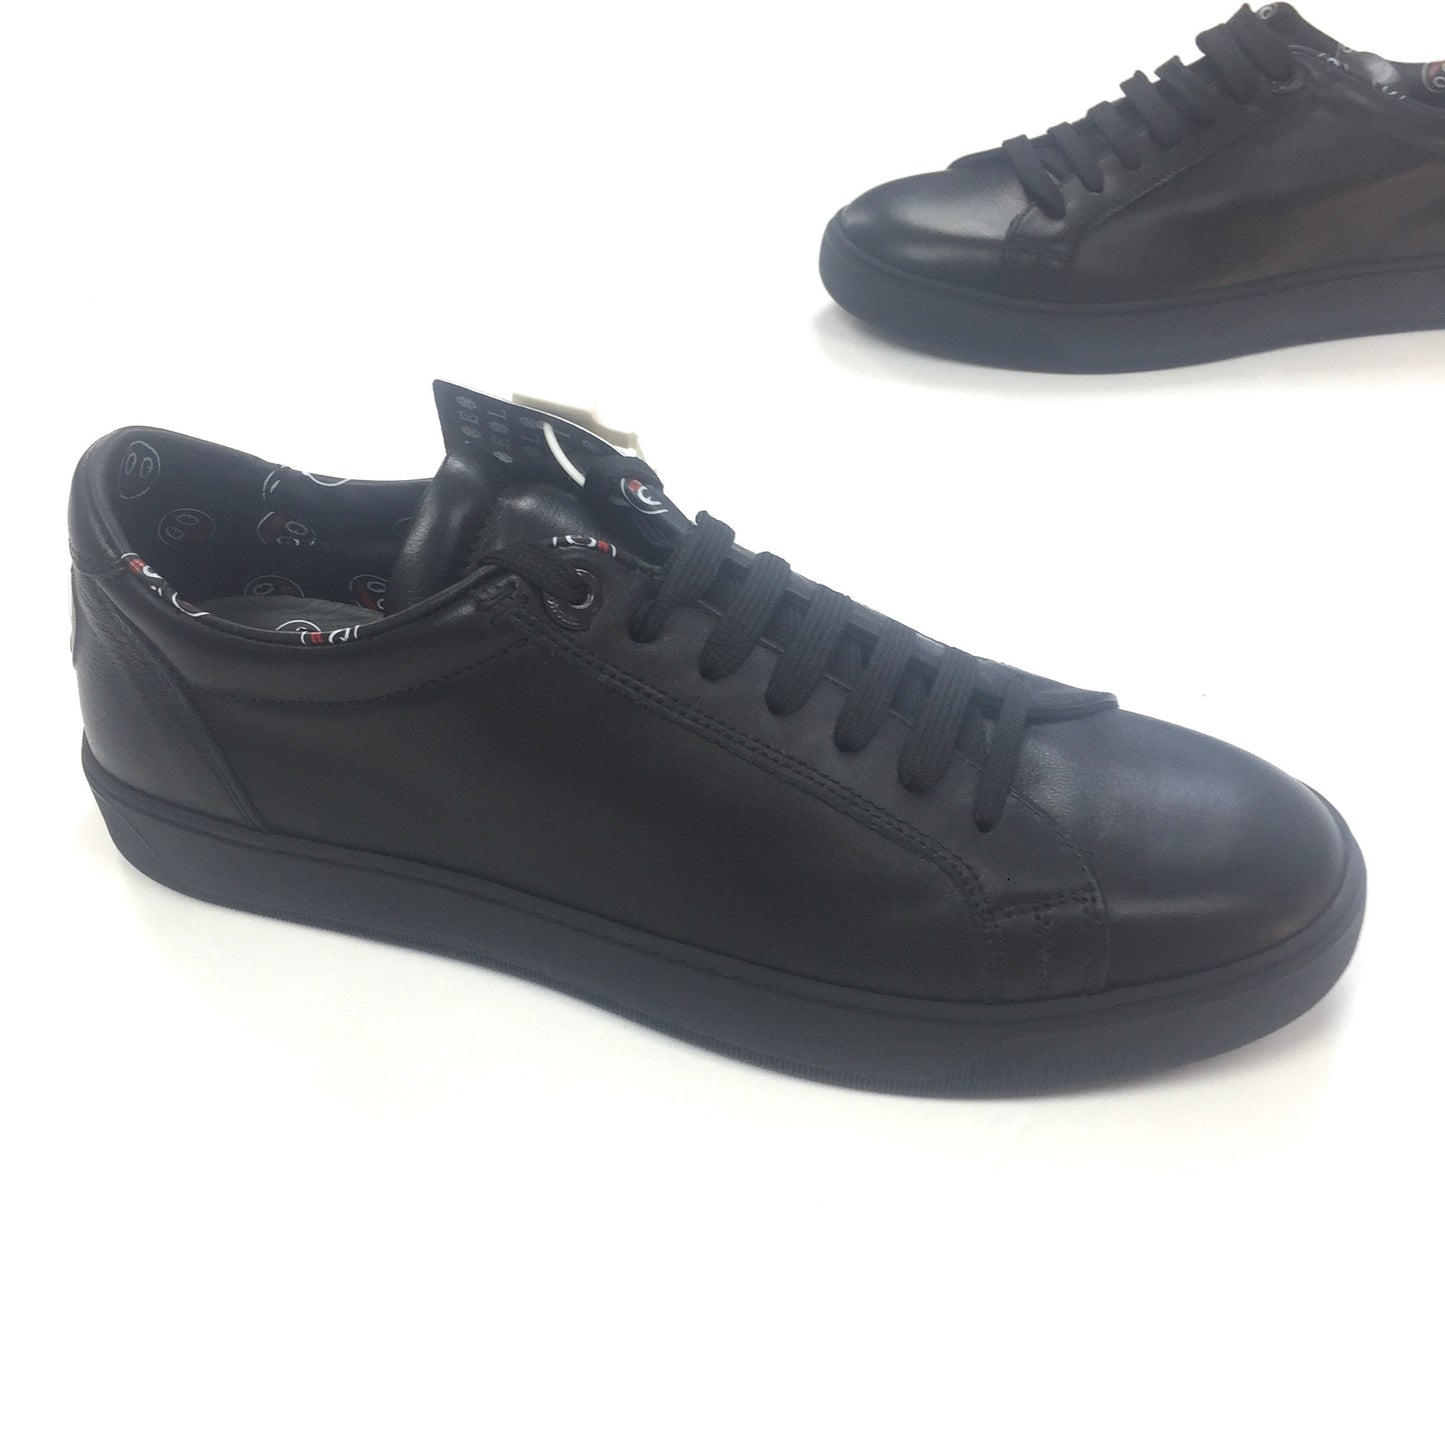 Moncler x Friends with You - Leather 'Malfi' Sneakers